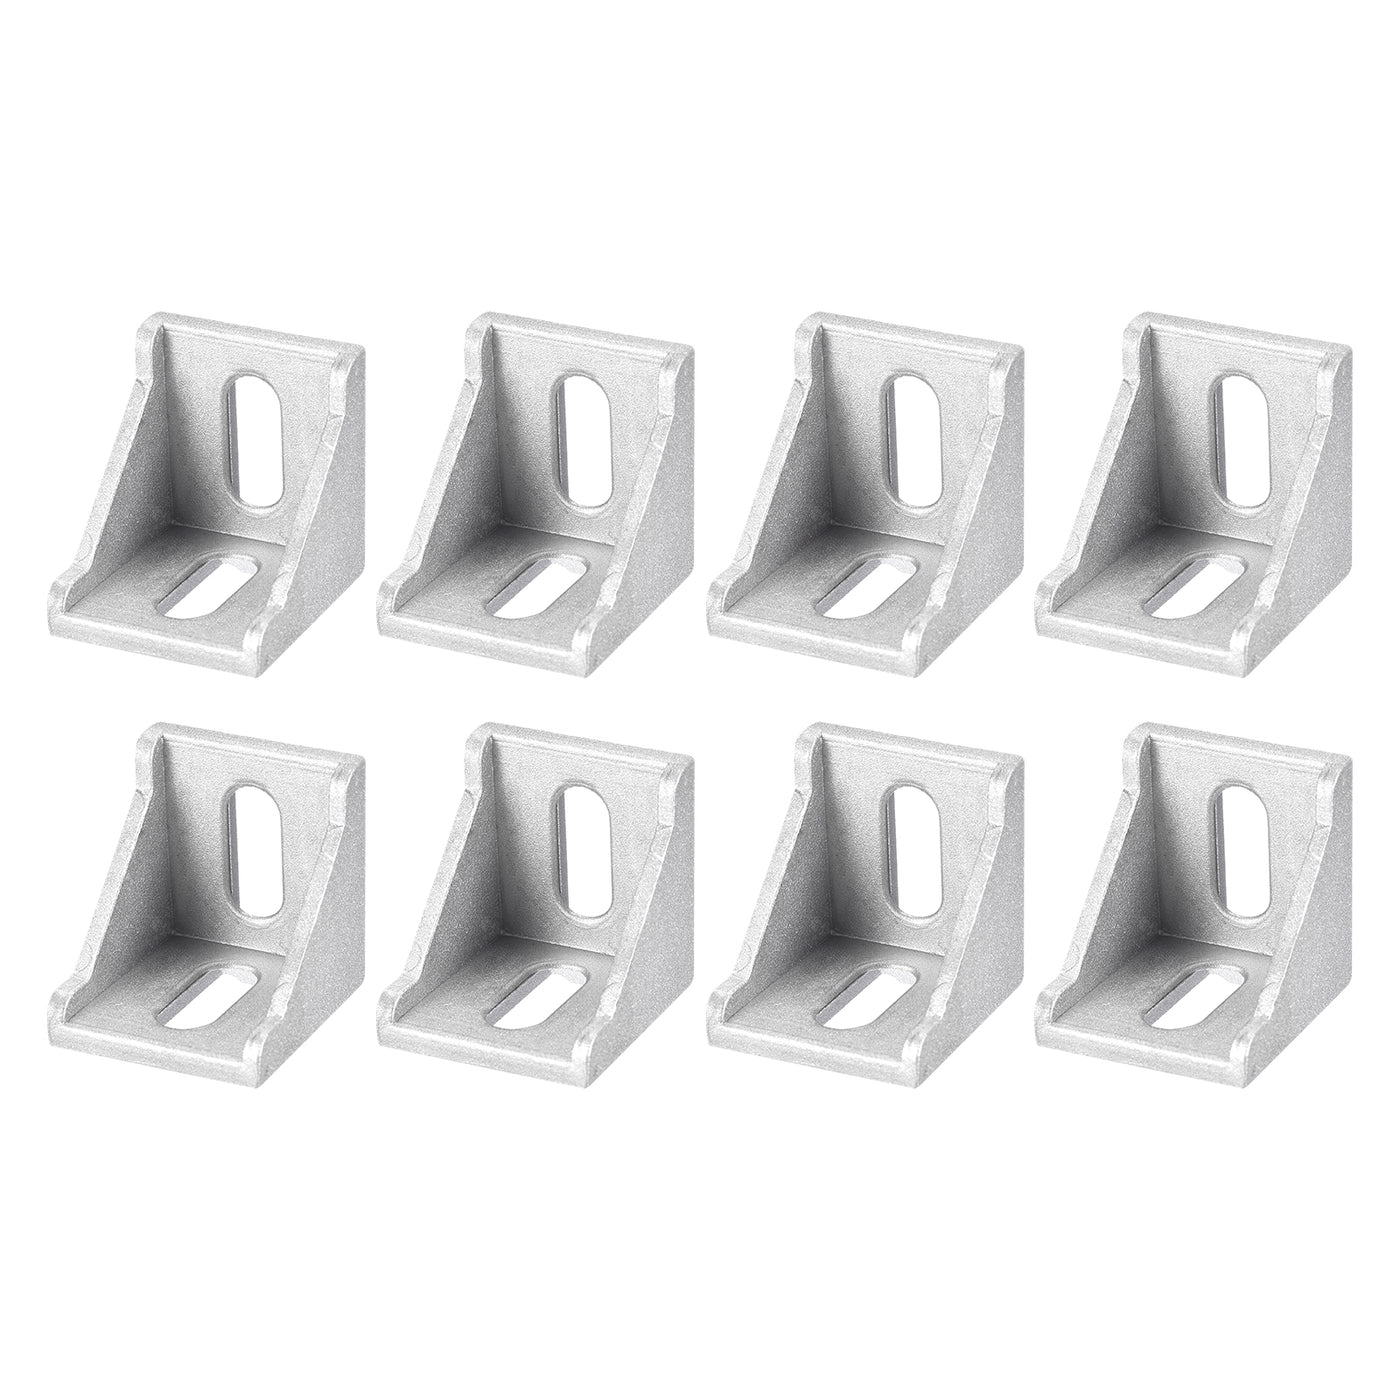 uxcell Uxcell 8Pcs Inside Corner Bracket Gusset, 38x38x35mm 4040 Angle Connectors for 4040/4080 Series Aluminum Extrusion Profile Silver